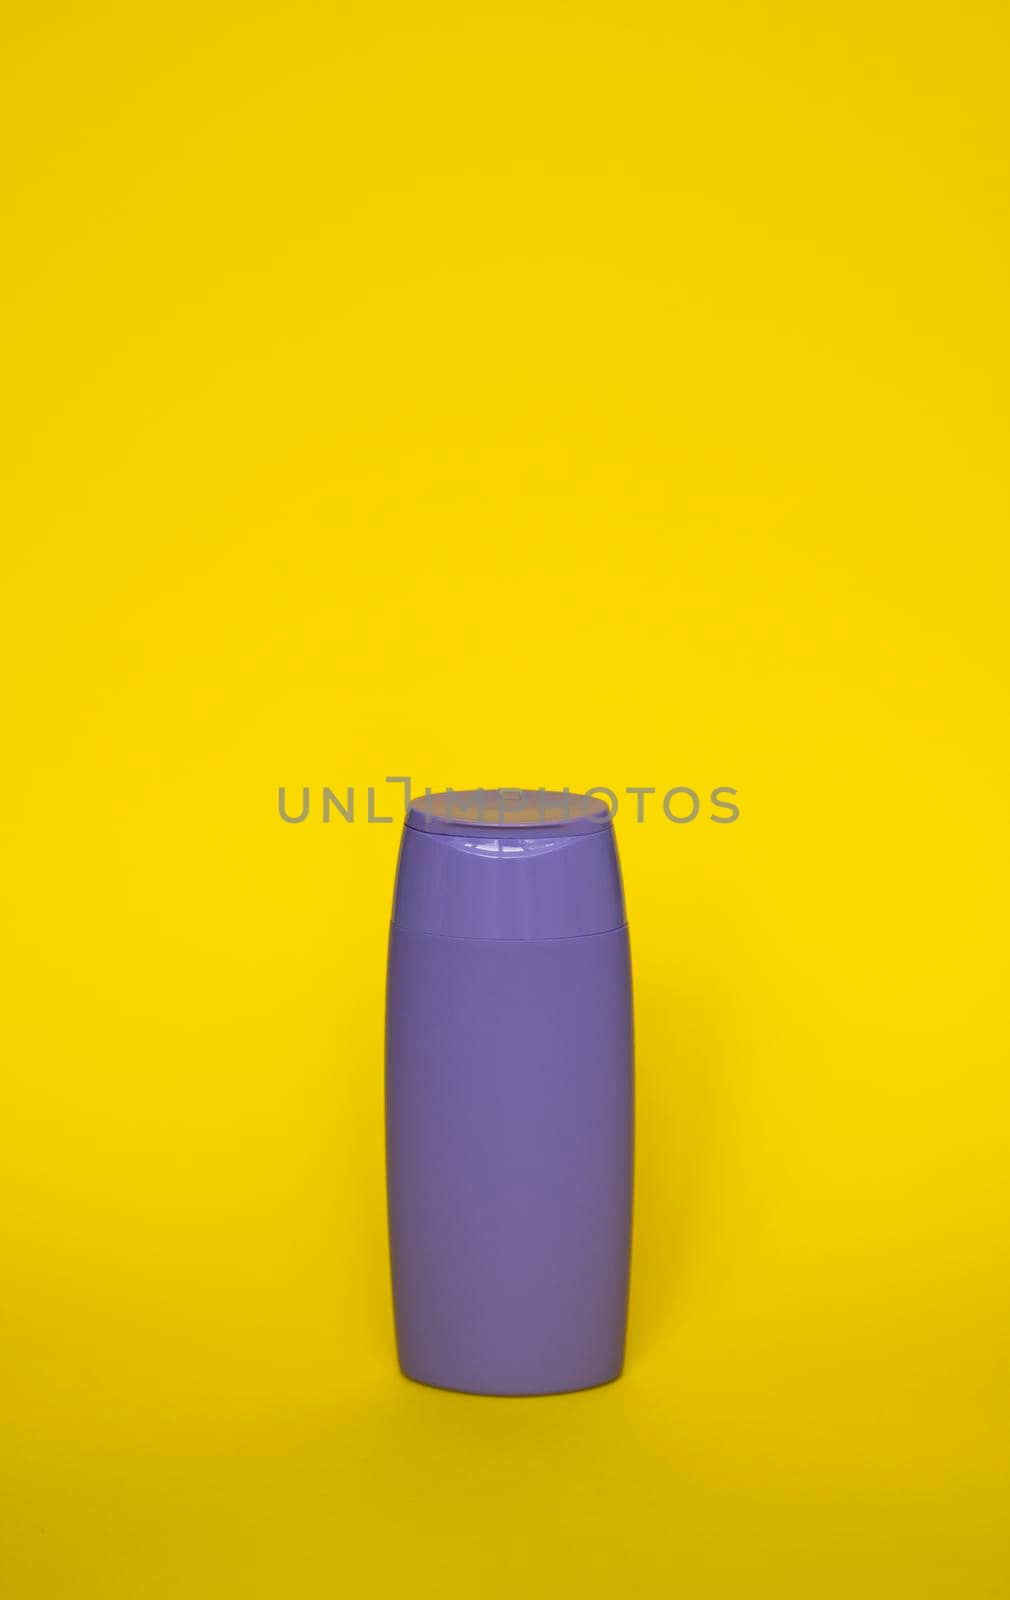 Violet plastic shampoo bottle isolated on yellow background. Skin care lotion. Bathing essential product. Shampoo bottle. Bath and body lotion. Fine liquid hand wash. by vovsht